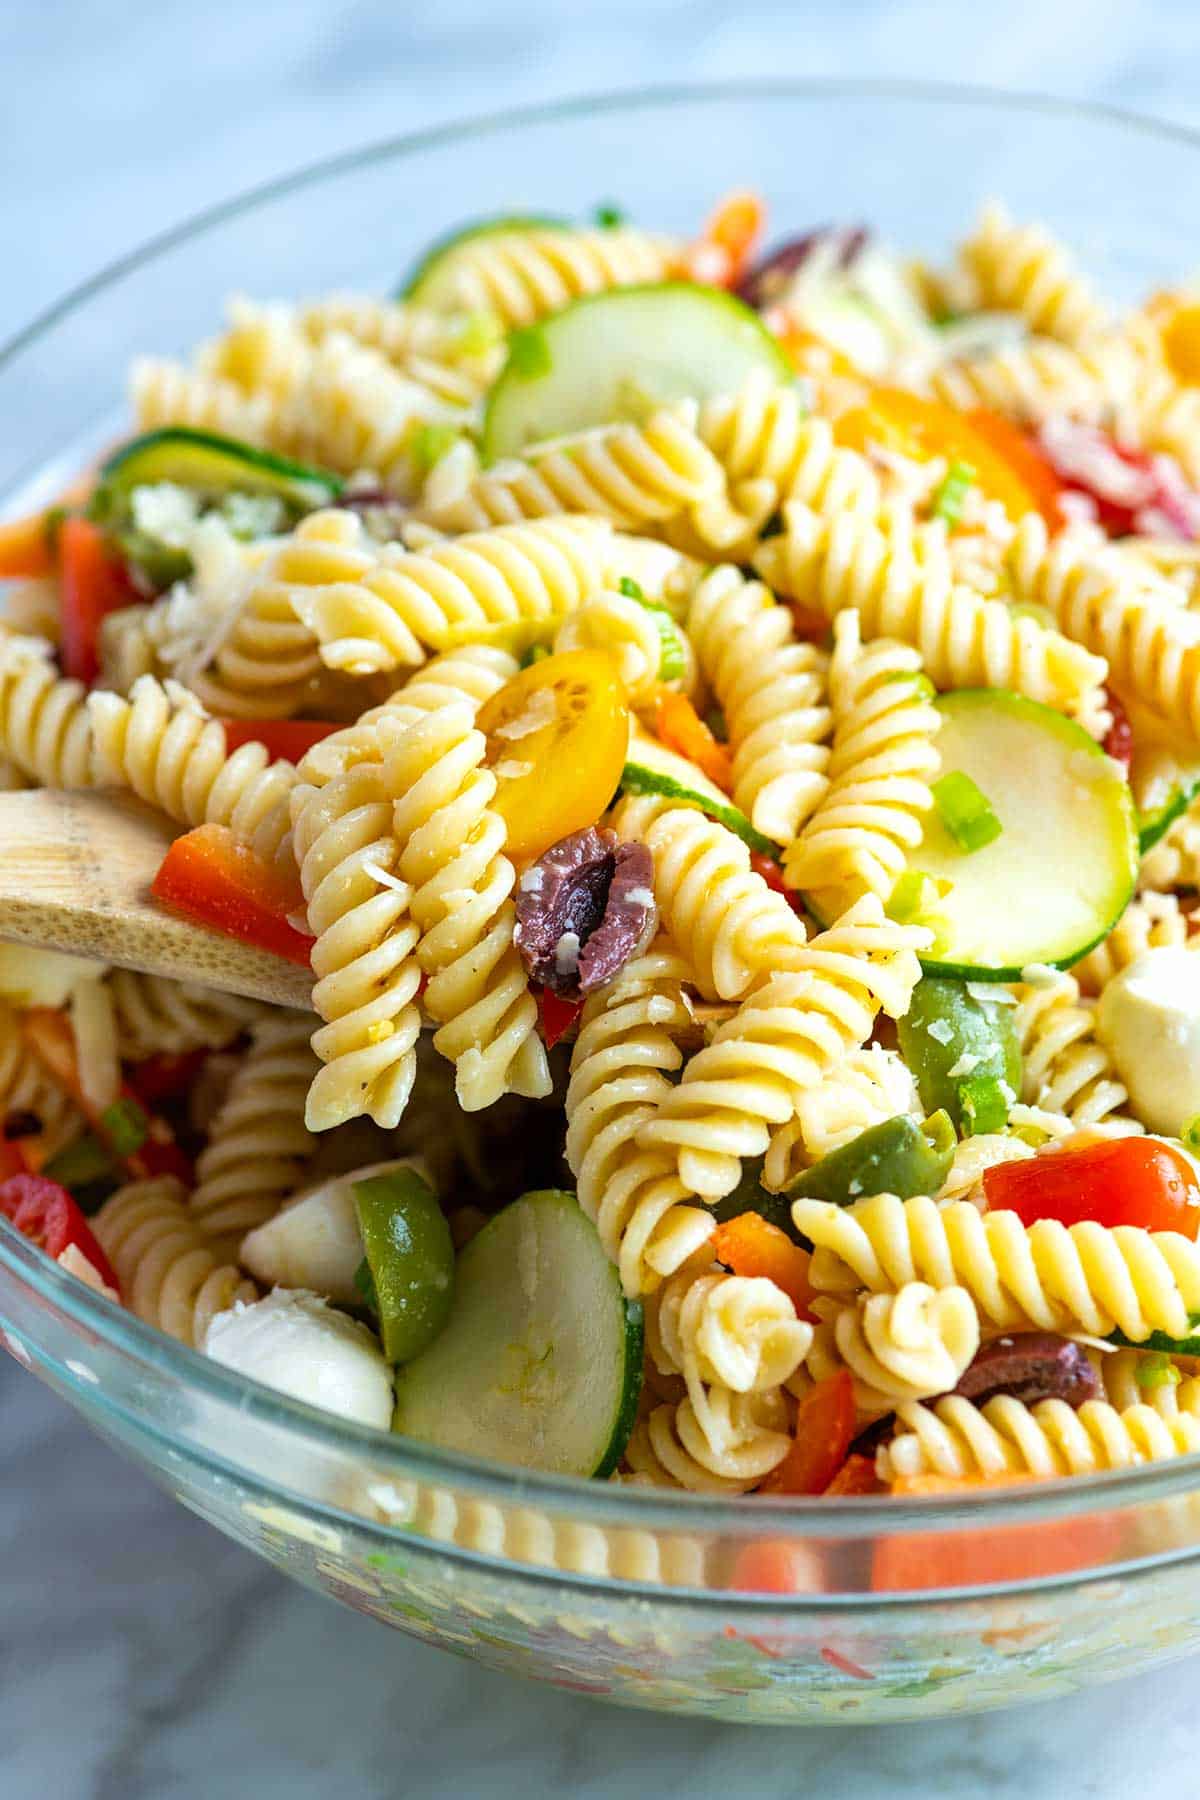 The Best Pasta Salad with fresh veggies, olives, and a homemade dressing.